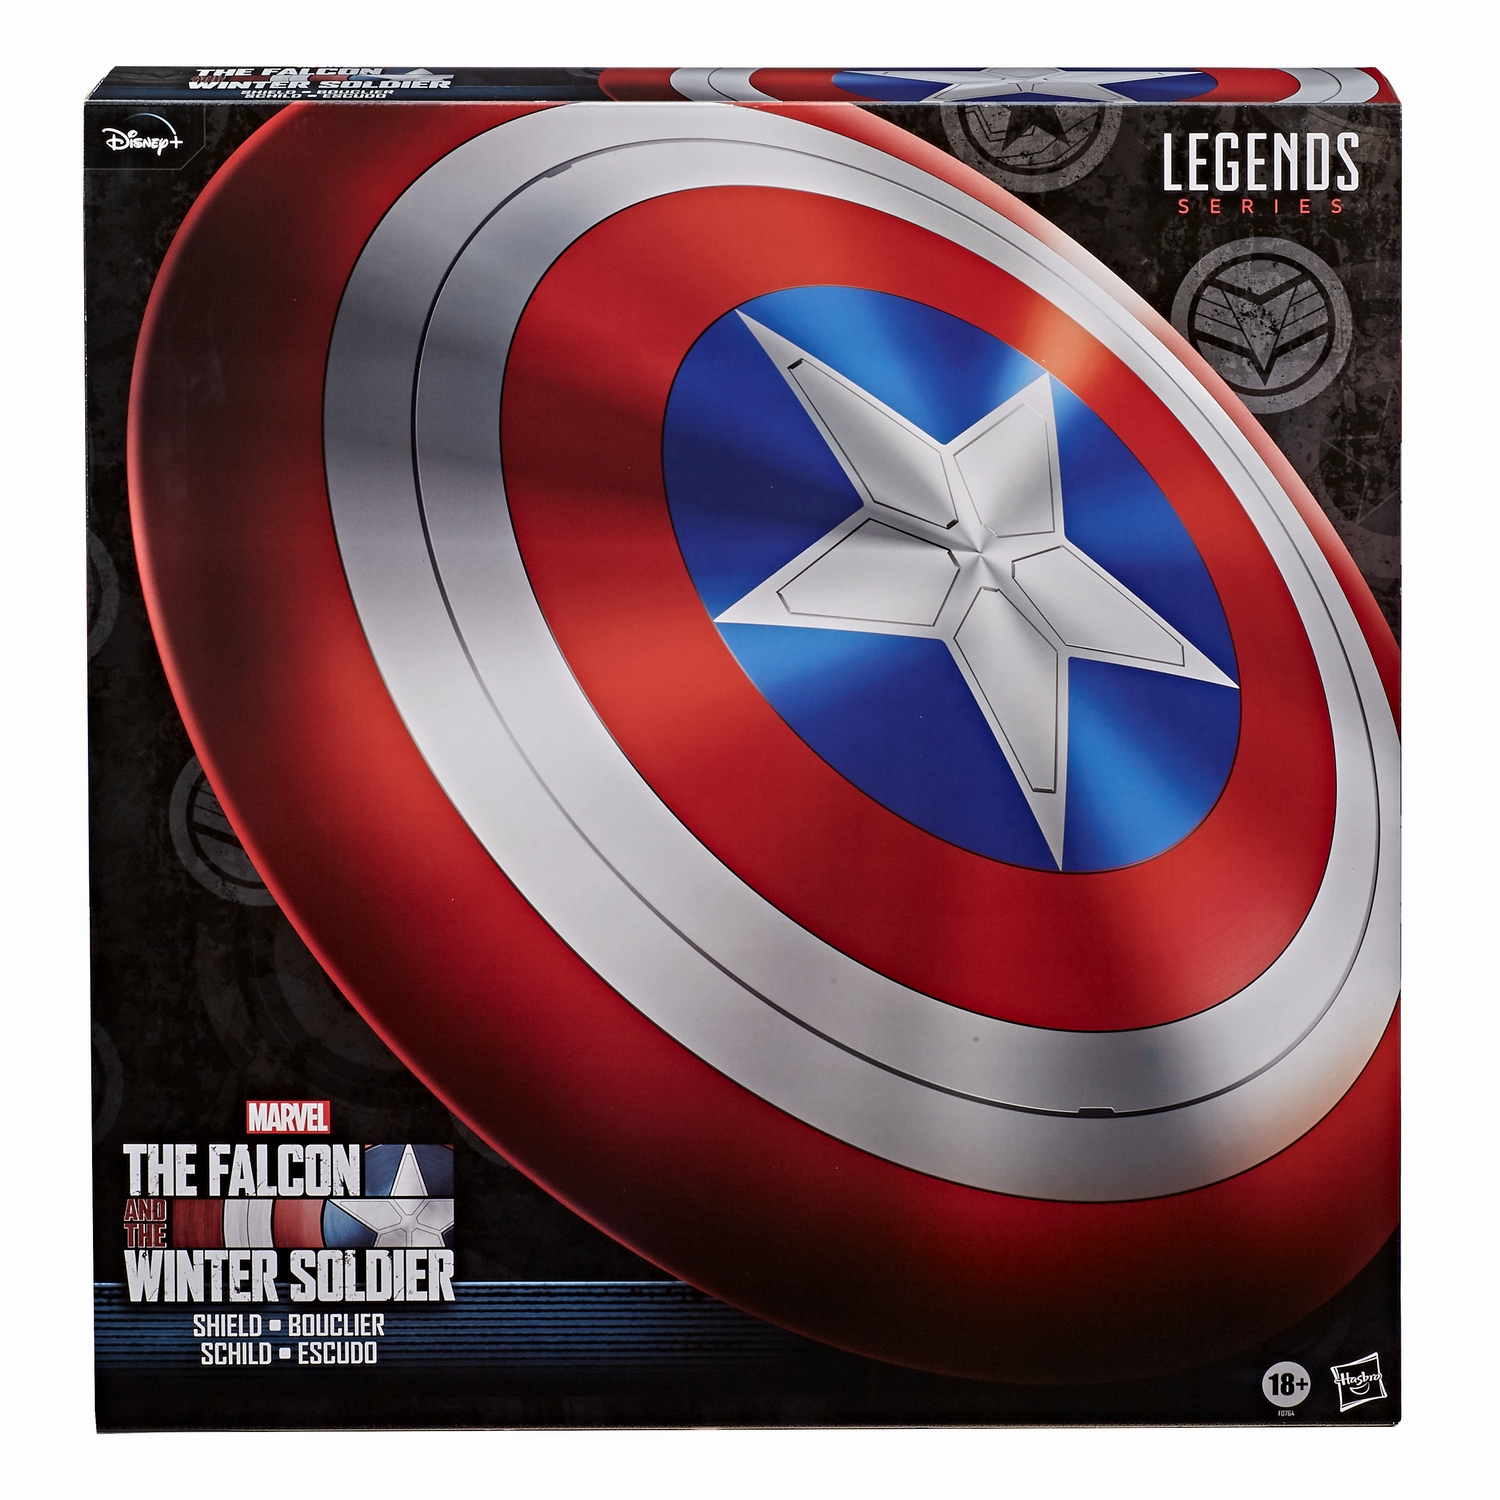 MARVEL LEGENDS SERIES THE FALCON & THE WINTER SOLDIER PREMIUM ROLE-PLAY SHIELD - pckging (2).jpg